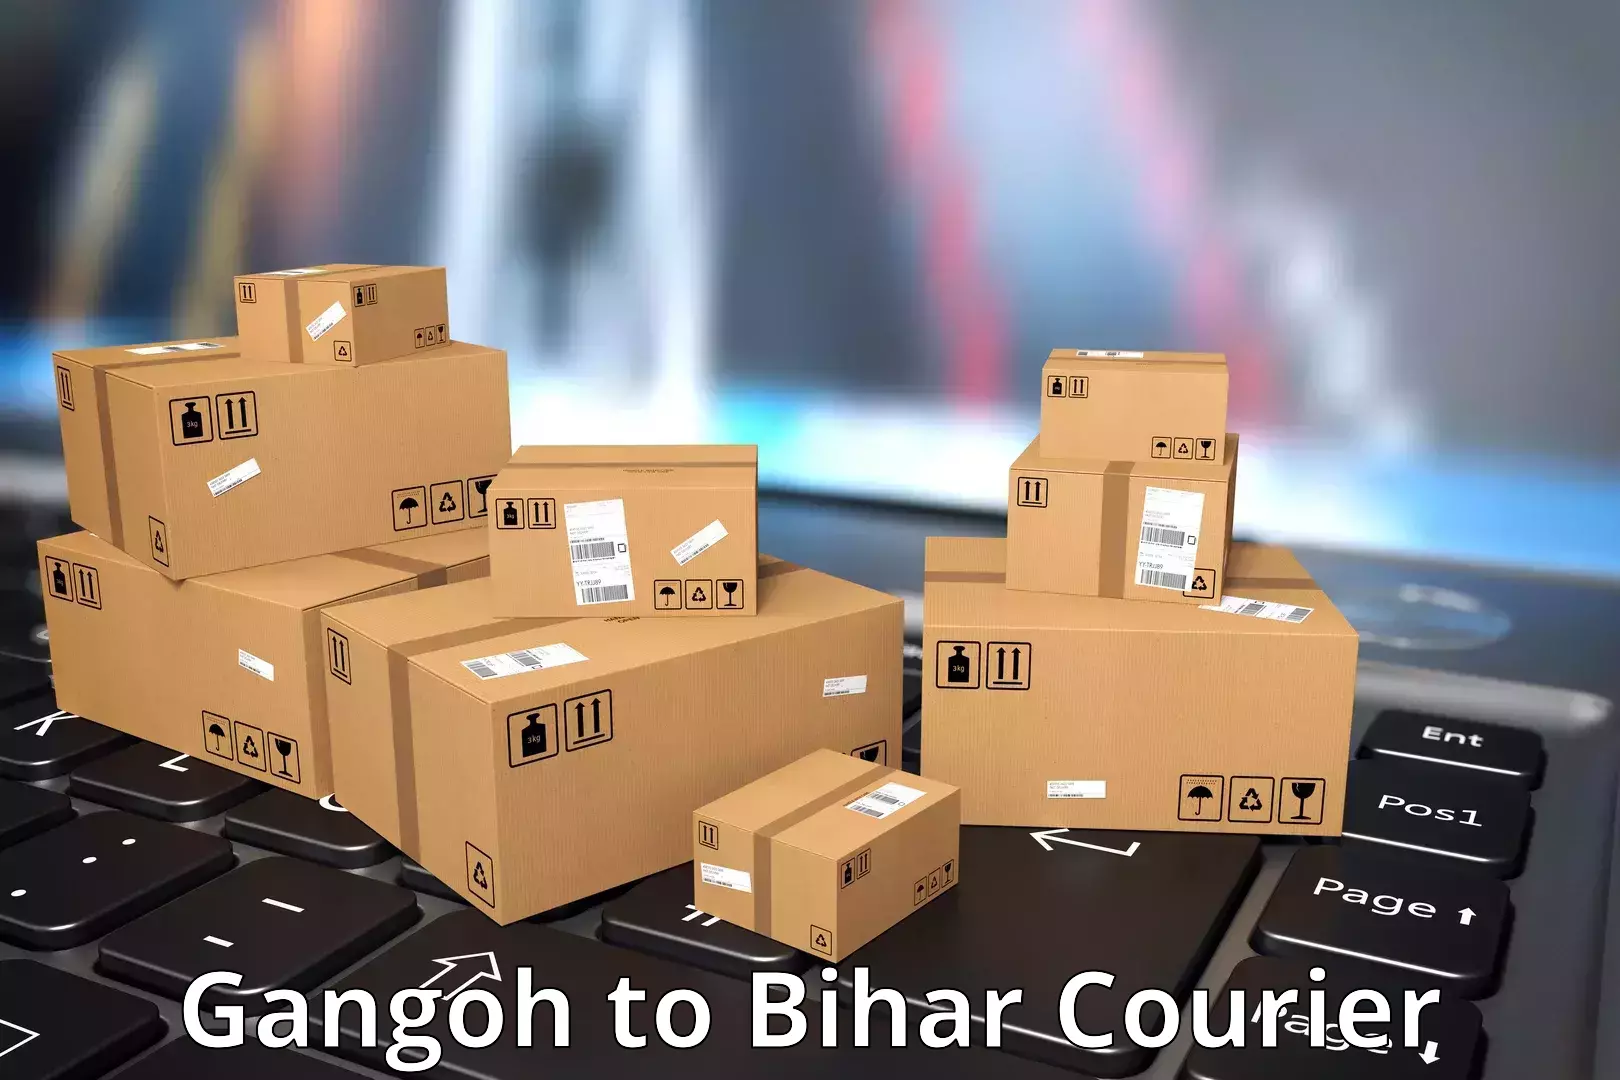 User-friendly delivery service Gangoh to Bihar